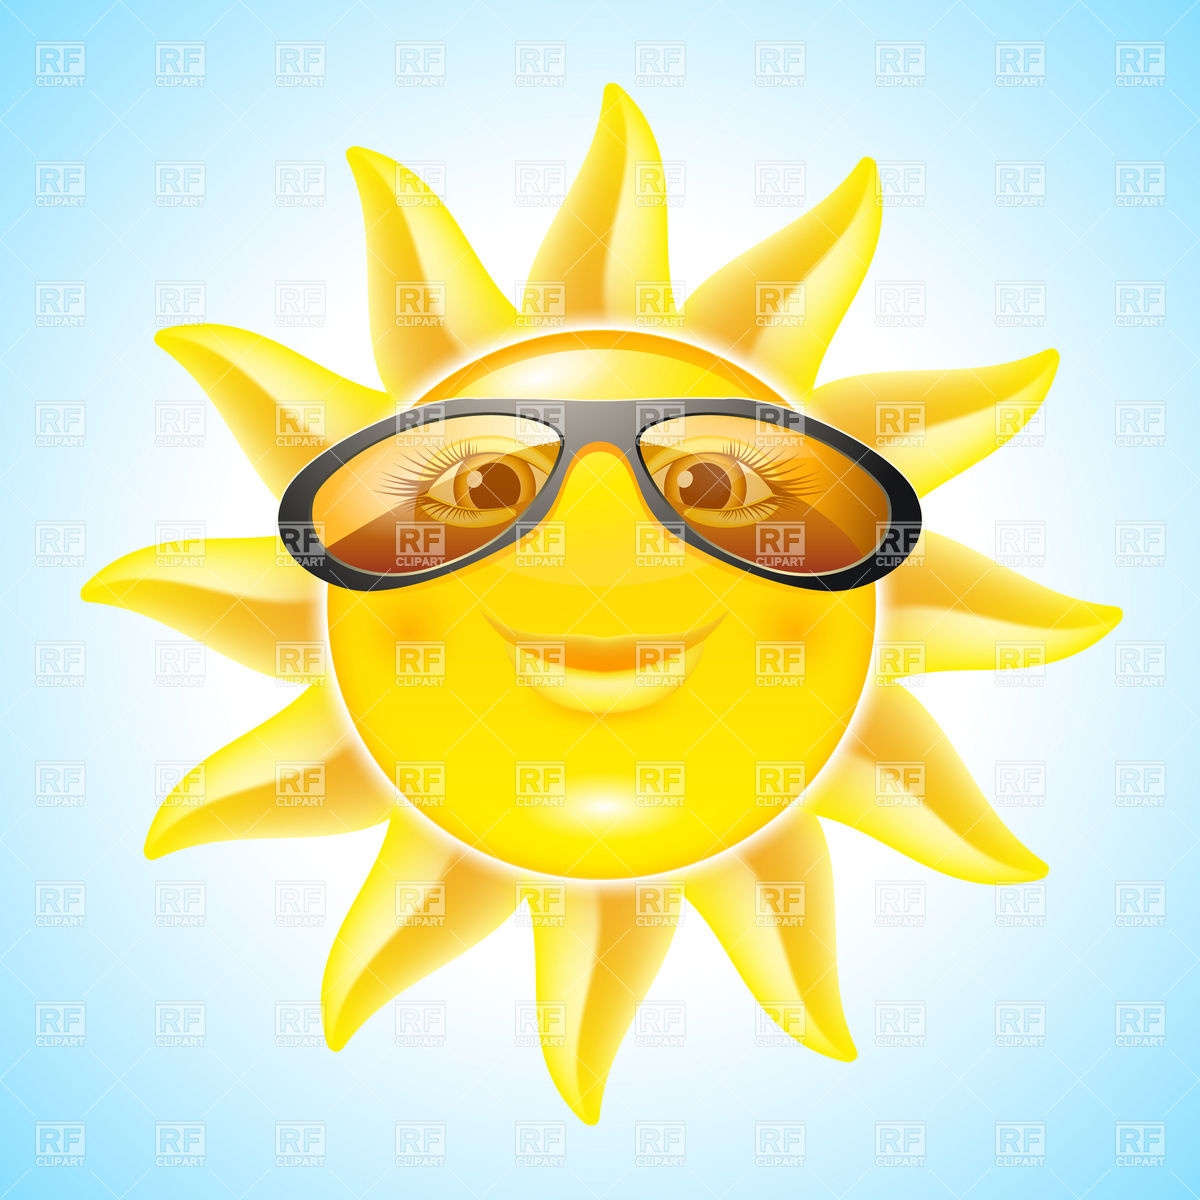 Sunbathing Smiling Sun With Sunglasses 8428 Download Royalty Free